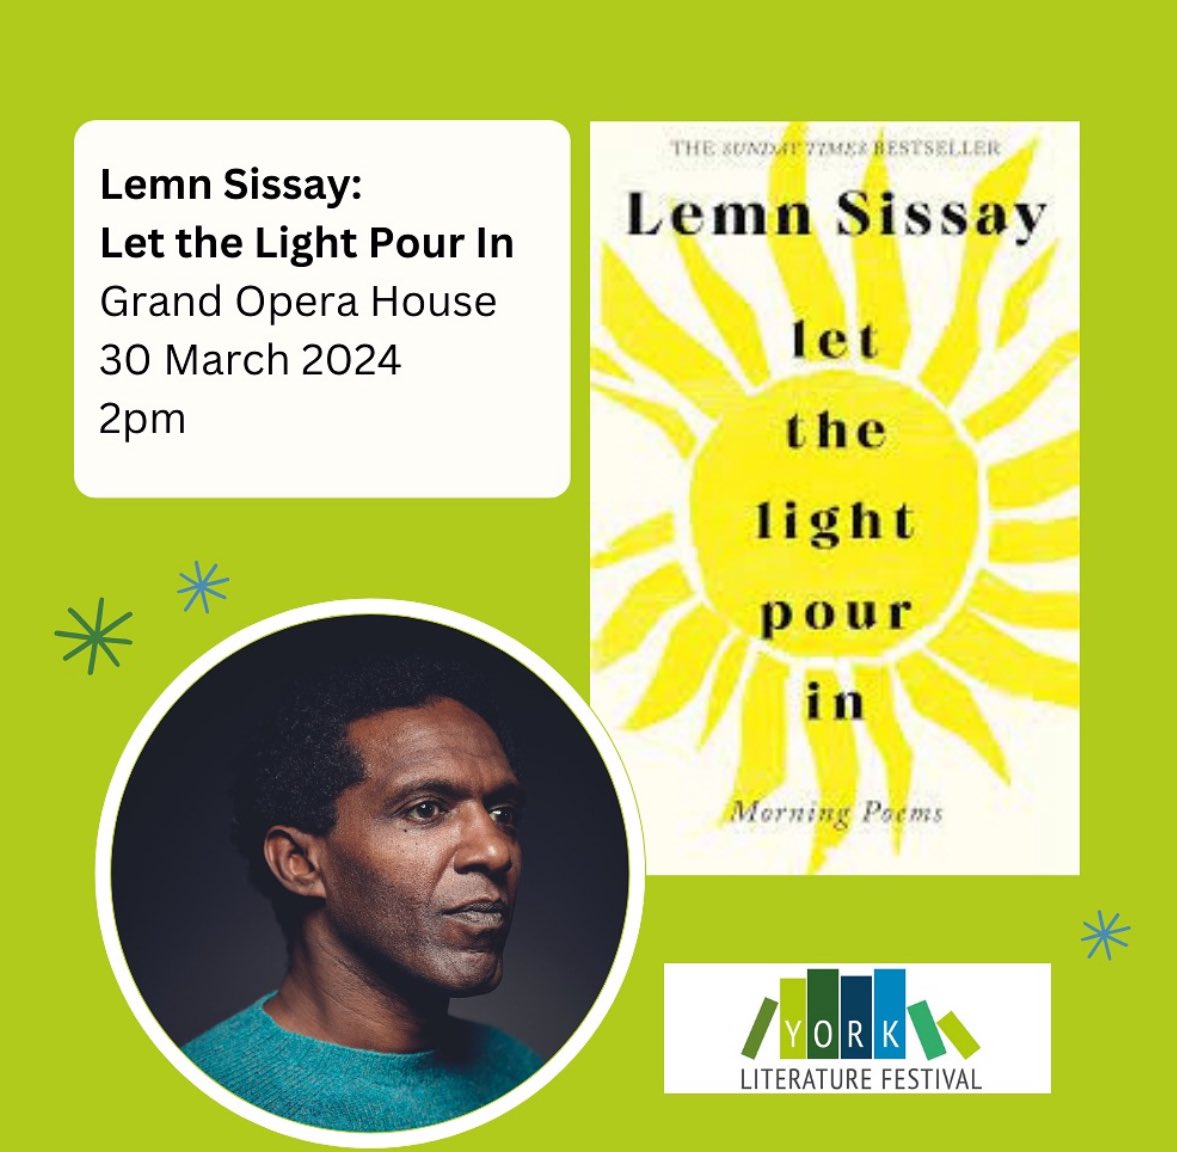 We are very excited to be working with the wonderful @lemnsissay once again ☀️ ☀️☀️☀️ Lemn will be appearing @grandoperayork as part of @YorkLitFest this Sat 30th March at 2pm, with a book-signing to follow ☀️☀️☀️☀️ Get your tickets here: shorturl.at/loDFI